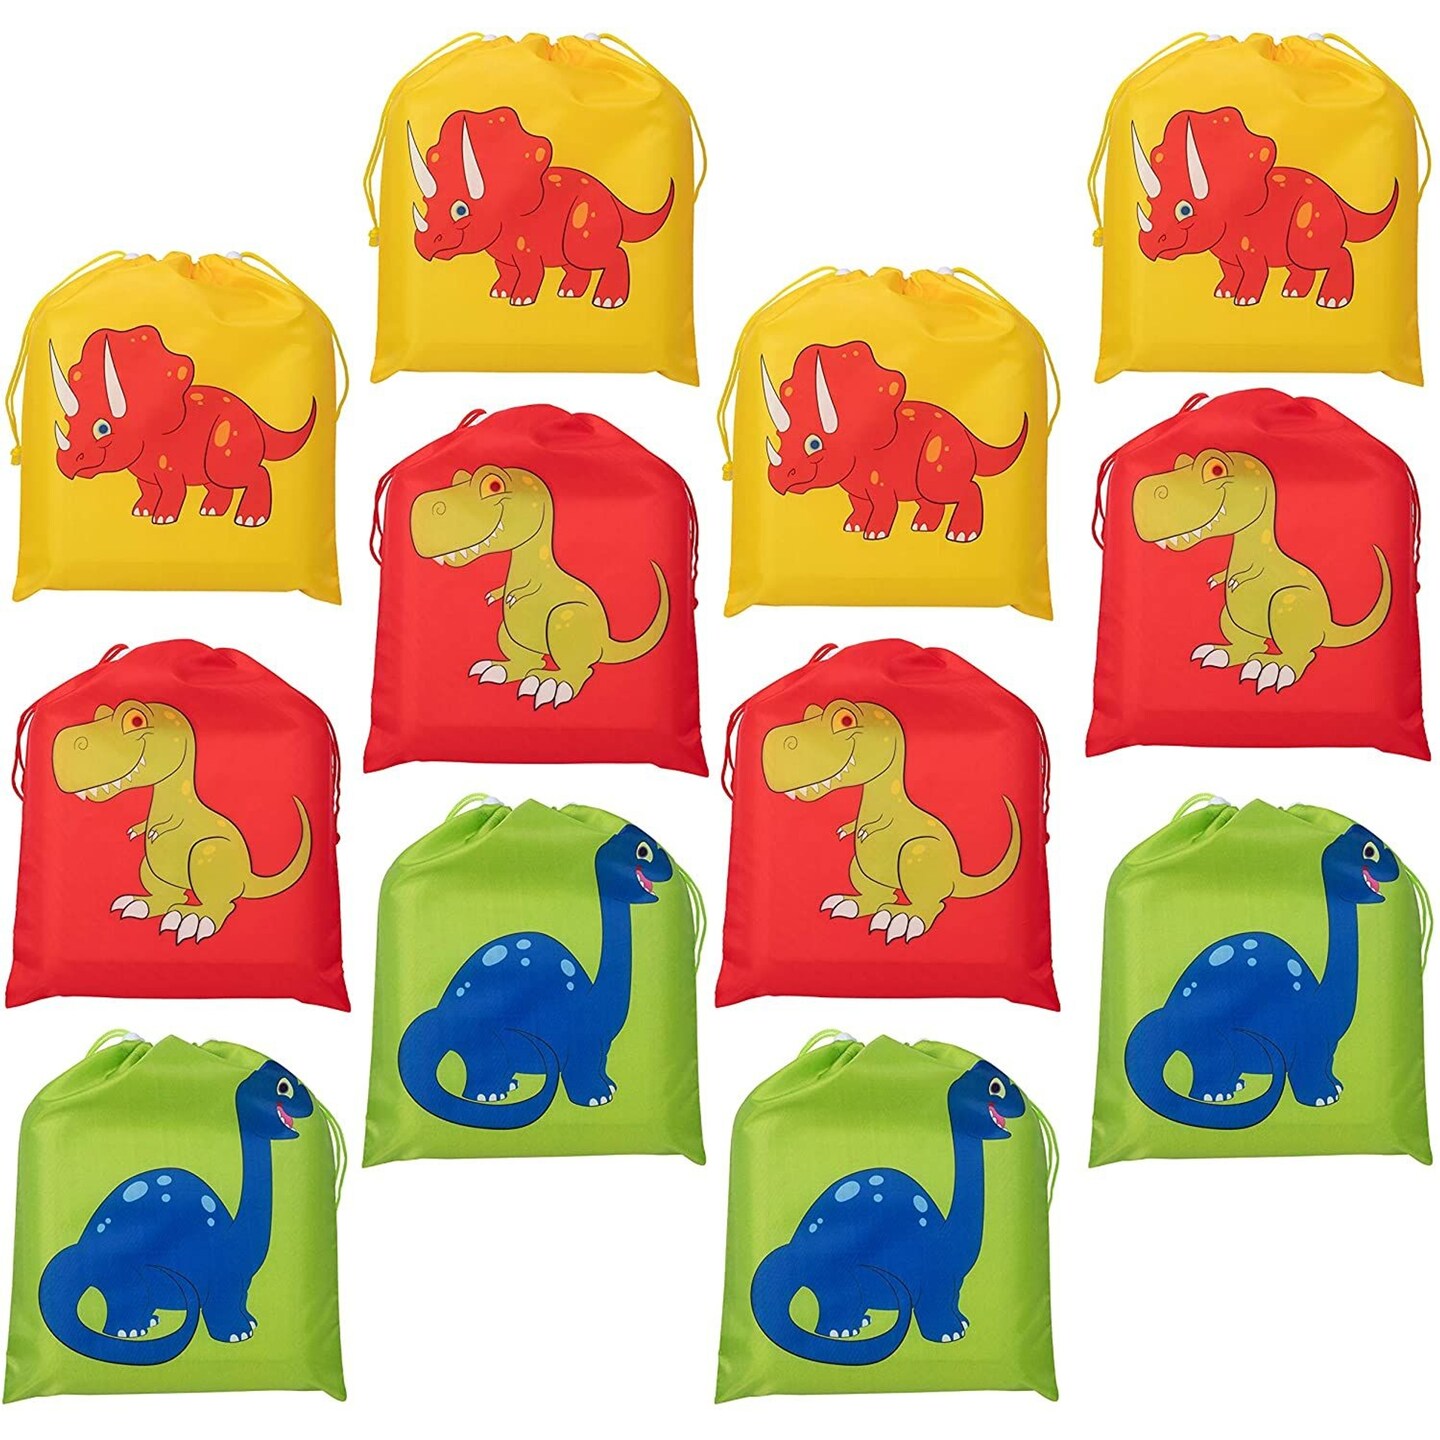 Drawstring Bags - 12-Pack Party Favor Bags for Kids Dinosaur Birthday, 3 Assorted Designs, Goodie Treat Bags, Dino Themed Party Supplies, For Giveaways and Gifts, Green, Red, Yellow, 9.7 x 12 Inches